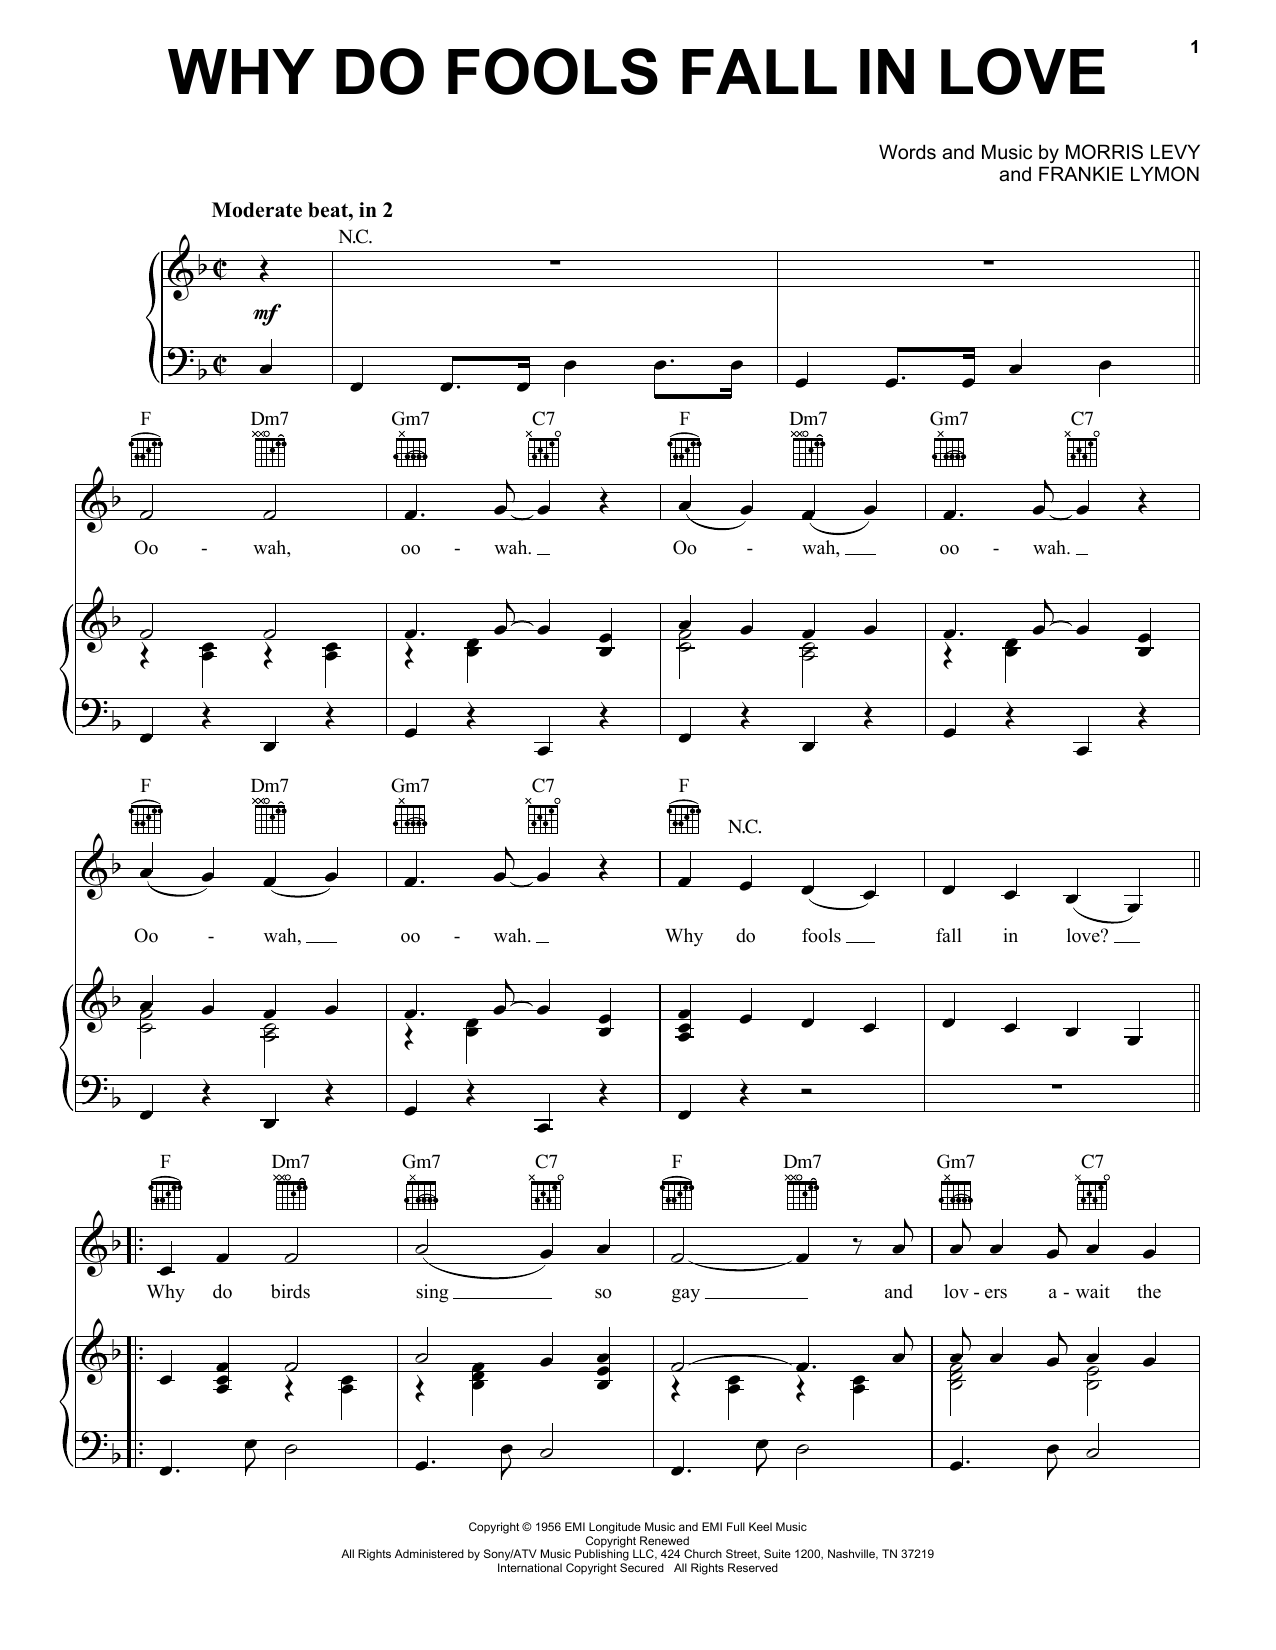 Frankie Lymon & The Teenagers Why Do Fools Fall In Love sheet music notes and chords. Download Printable PDF.